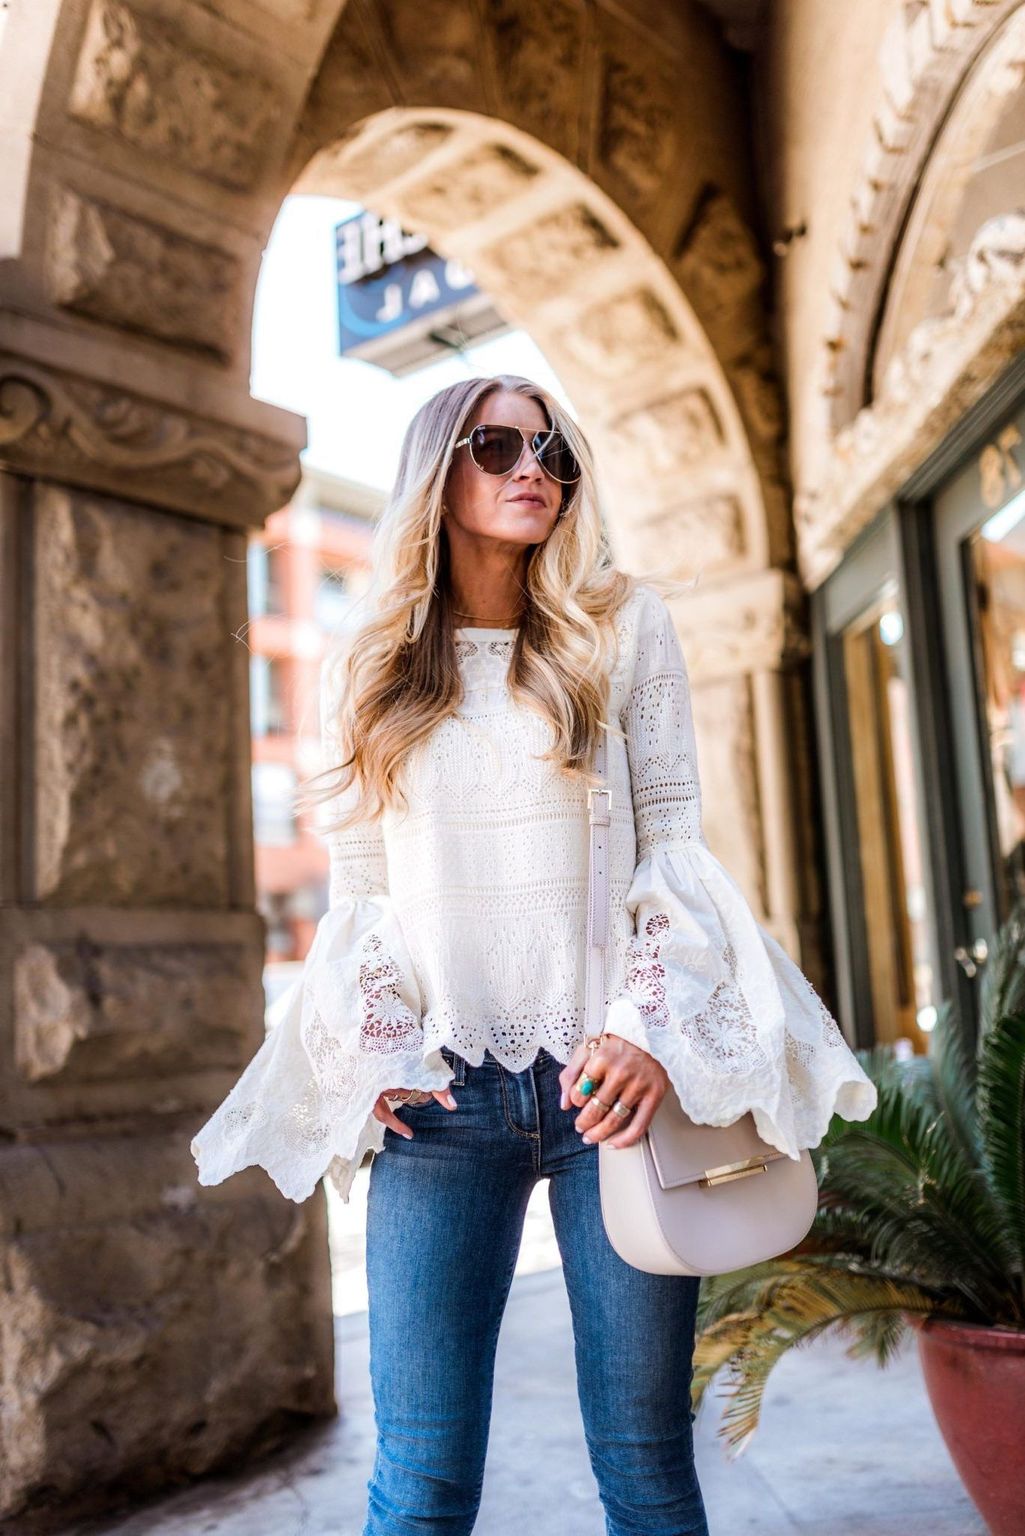 What Lace Tops Should You Buy This Year: Easy Outfit Ideas 2023